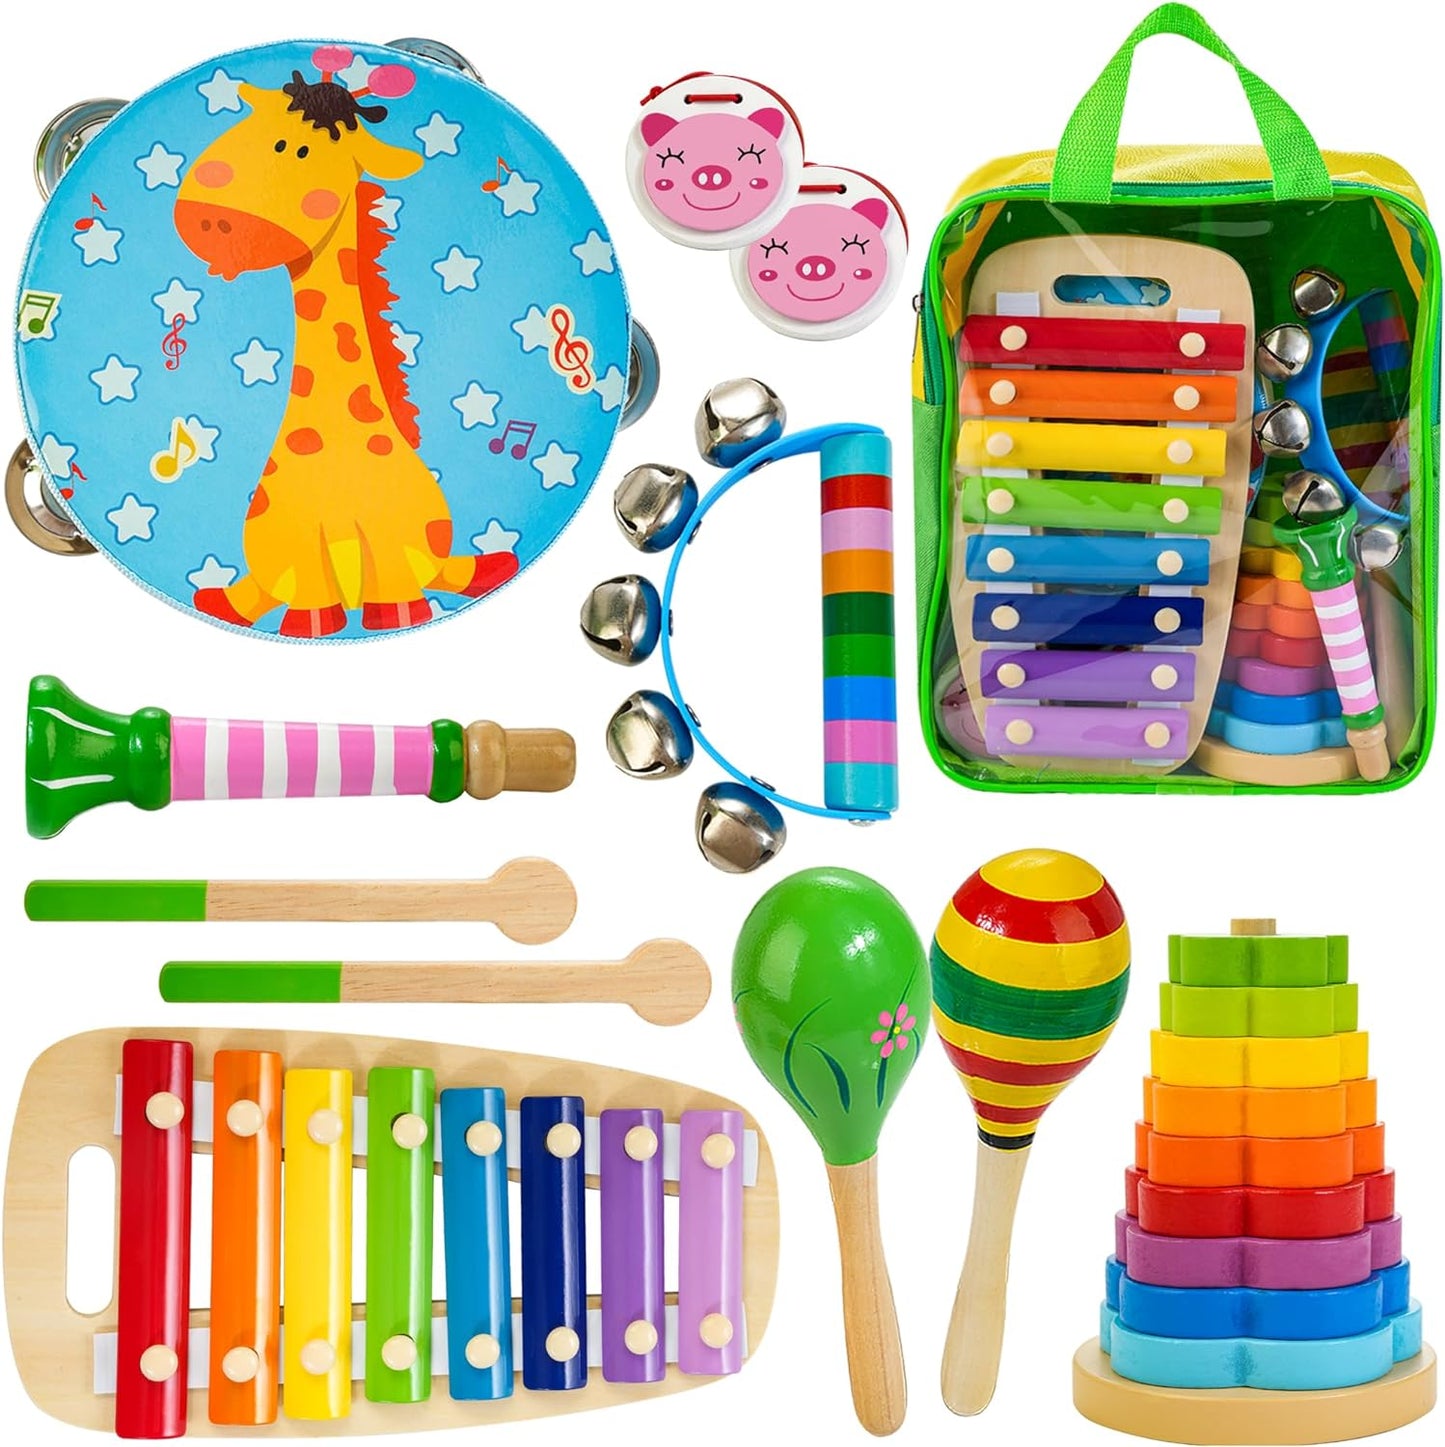 Kids Musical Instruments, Wooden Musical Toys Set for Toddlers Age 2-4 with Xylophone Maracas Tambourine, Educational Baby Montessori Musical Toys Birthday Gift for 2 3 4 5 Years Old Girls Boys